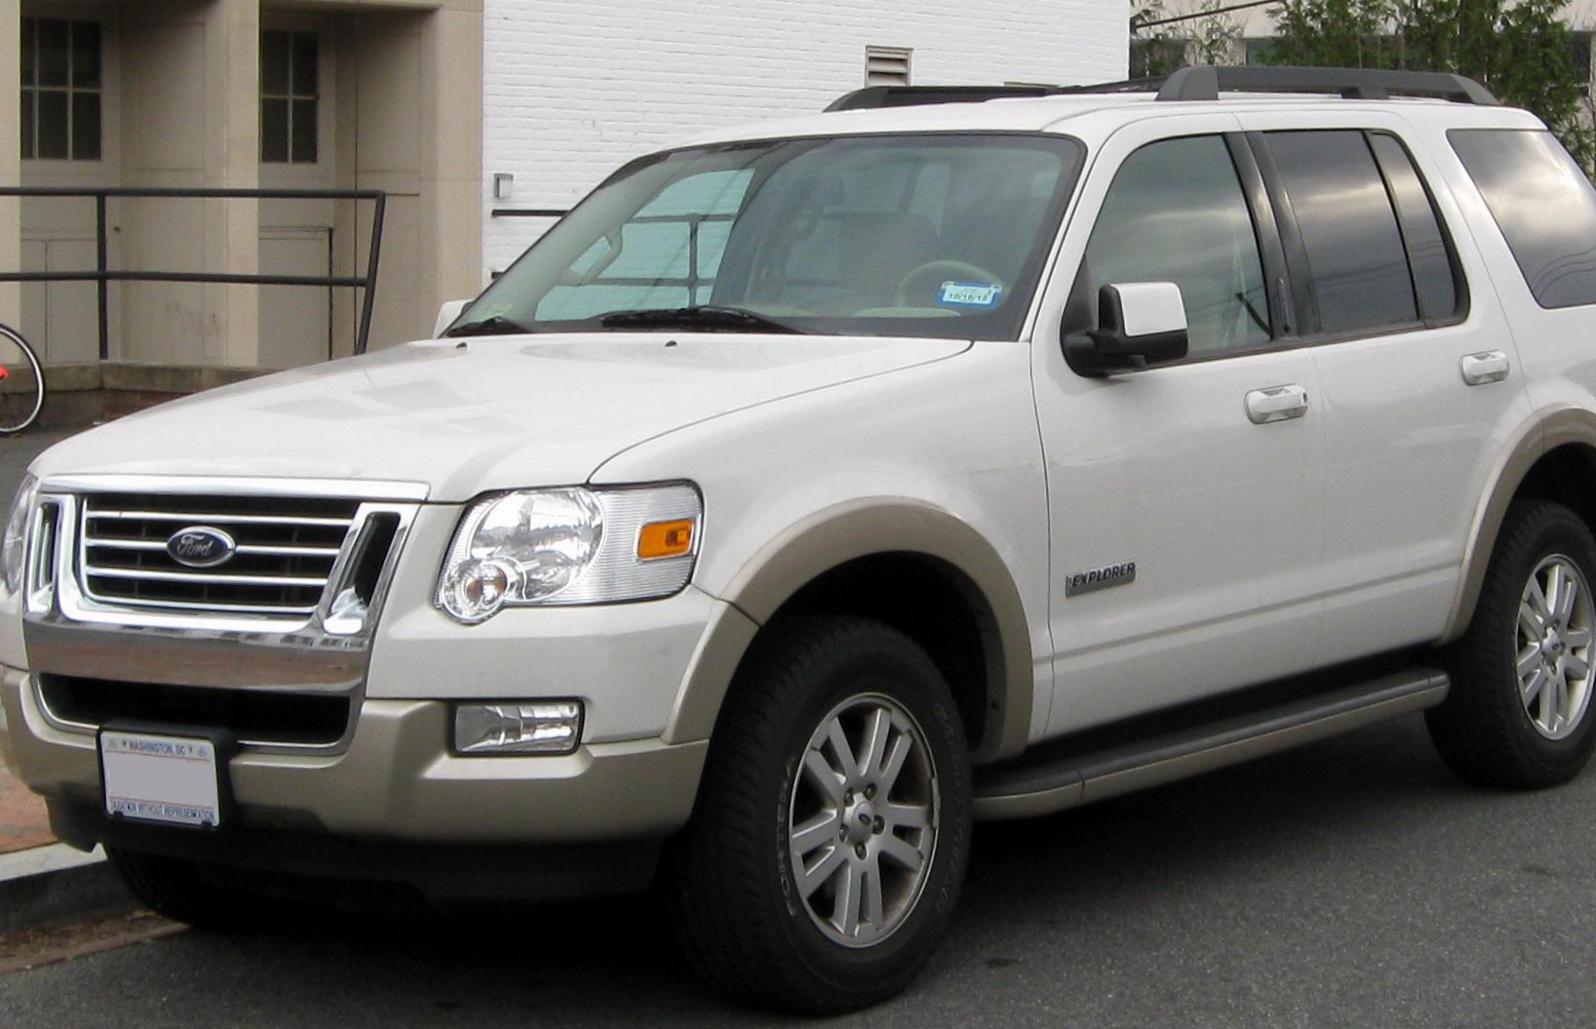 Ford Explorer cost 2006